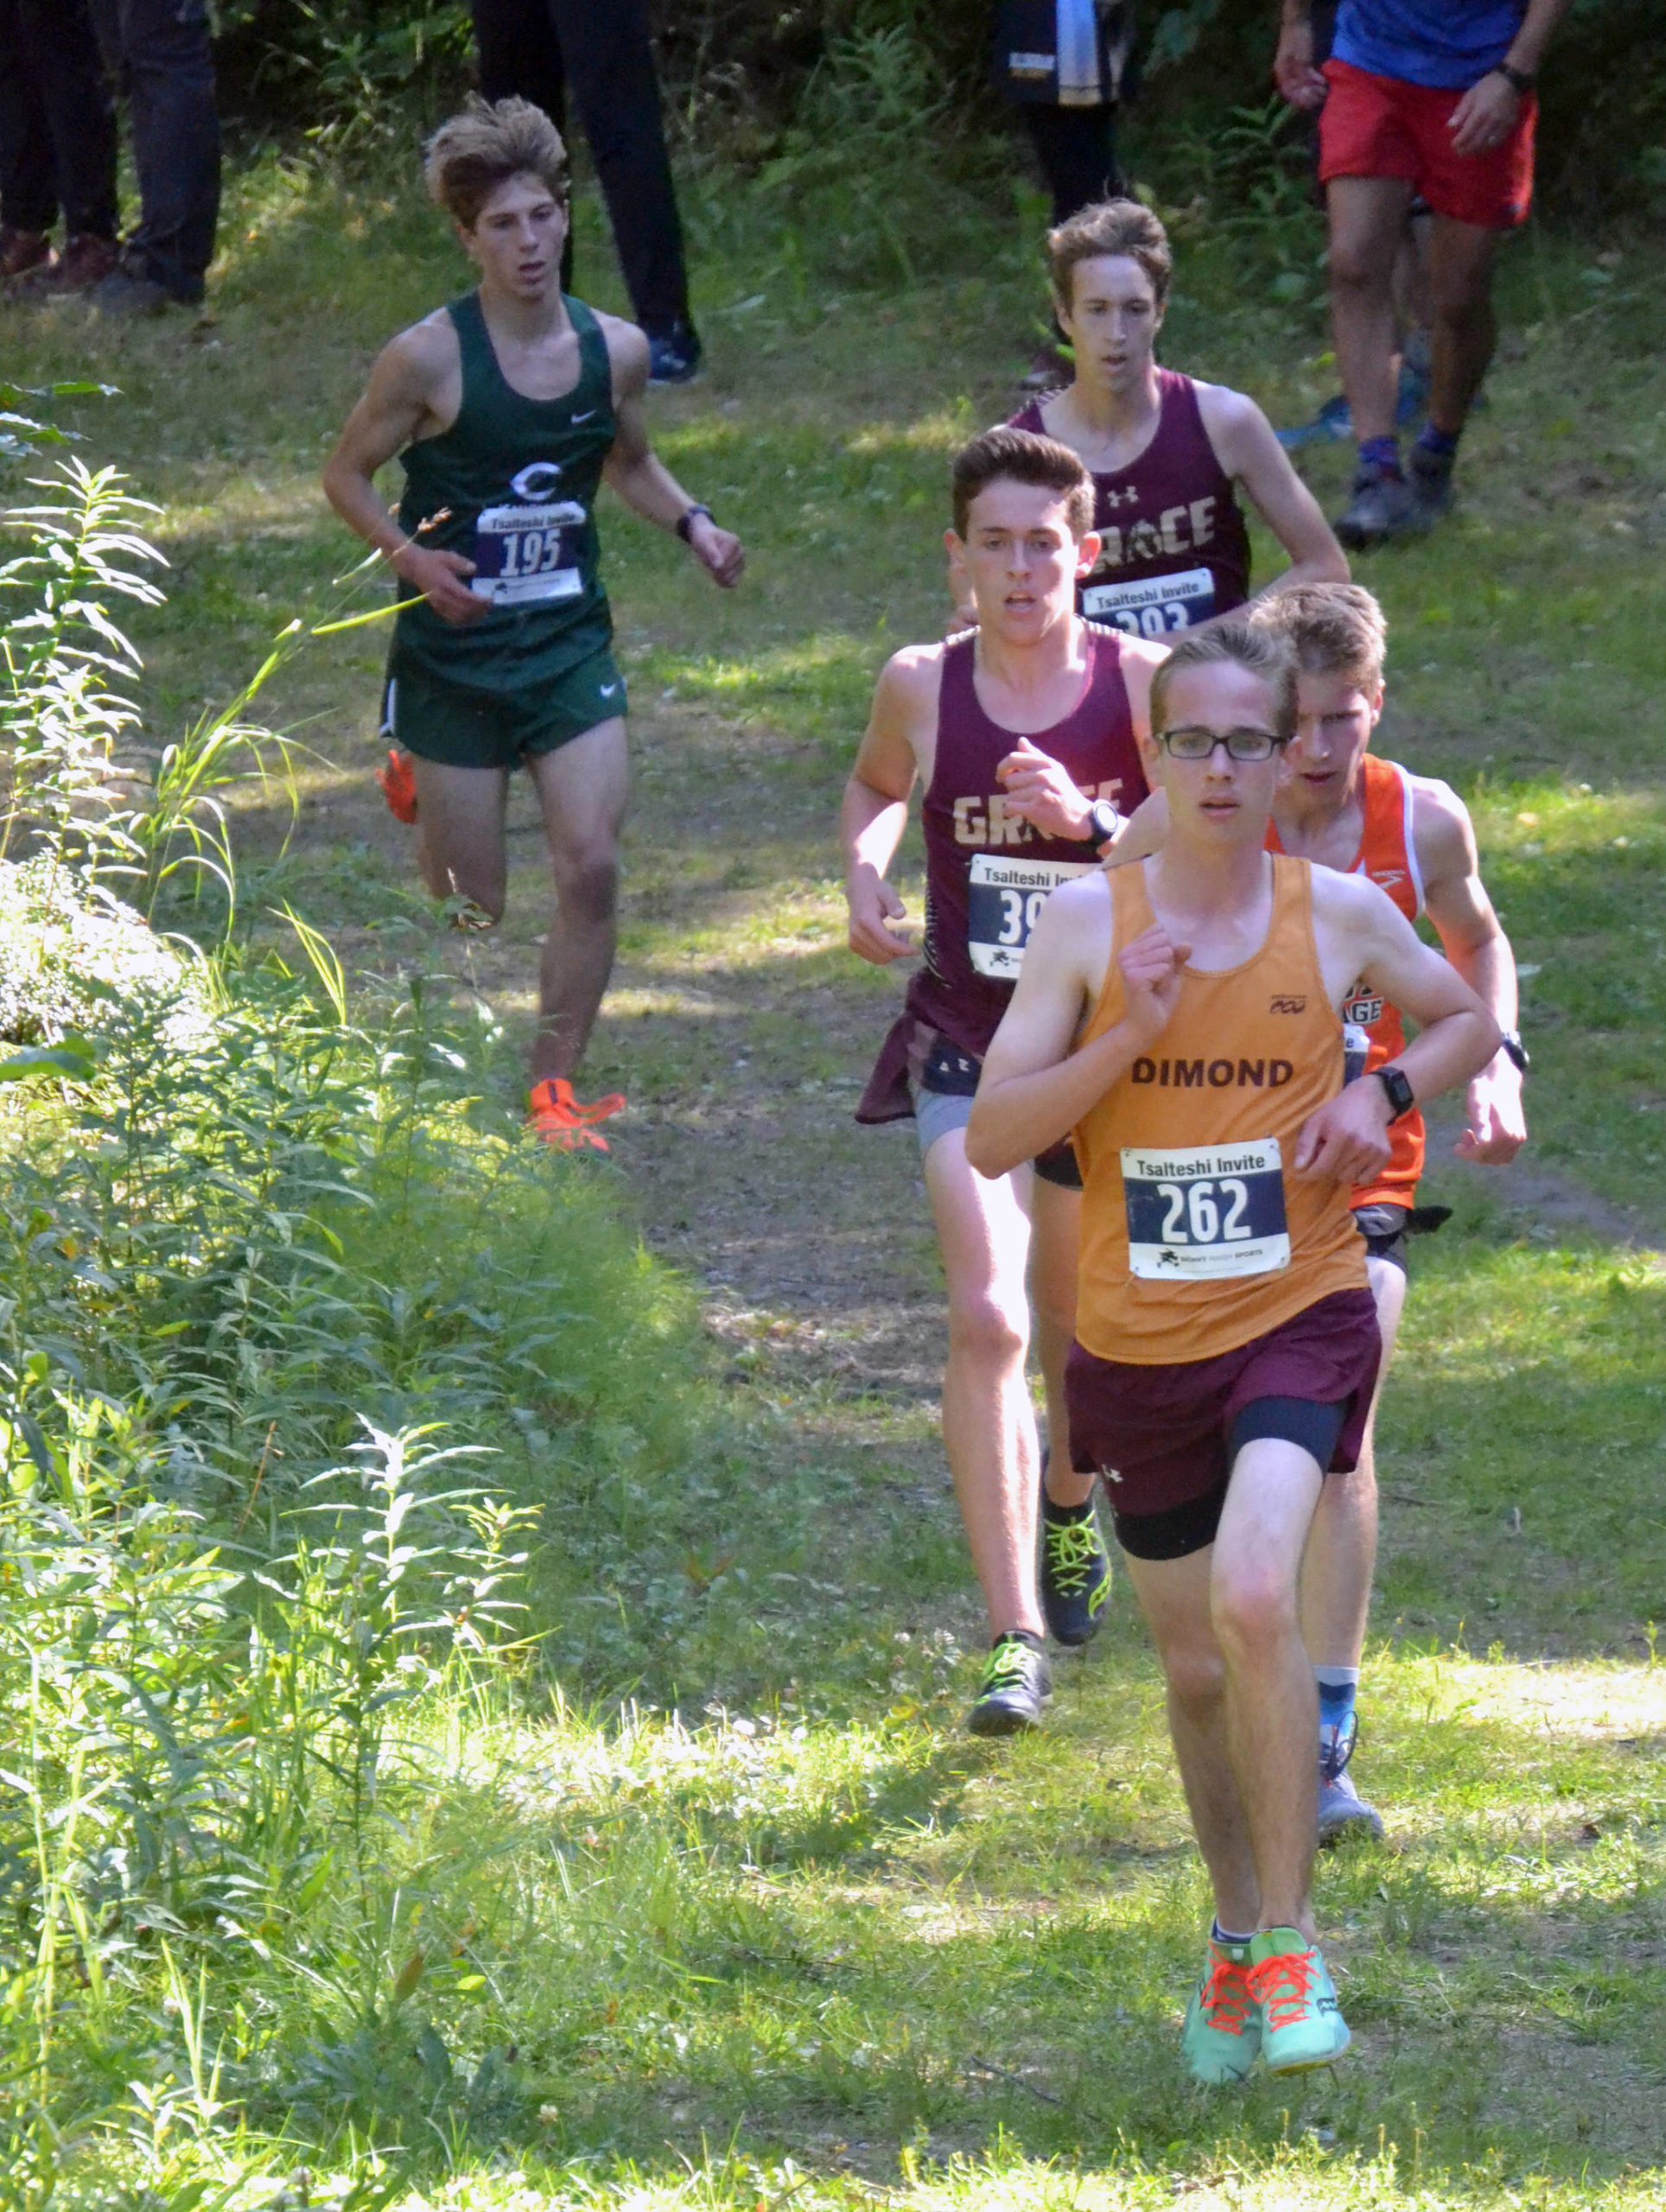 Dimond’s Jared Gardiner takes the lead for good in the boys varsity race at the Ted McKenney XC Invitational on Saturday, Aug. 21, 2021, at Tsalteshi Trails just outside of Soldotna, Alaska. (Photo by Jeff Helminiak/Peninsula Clarion)